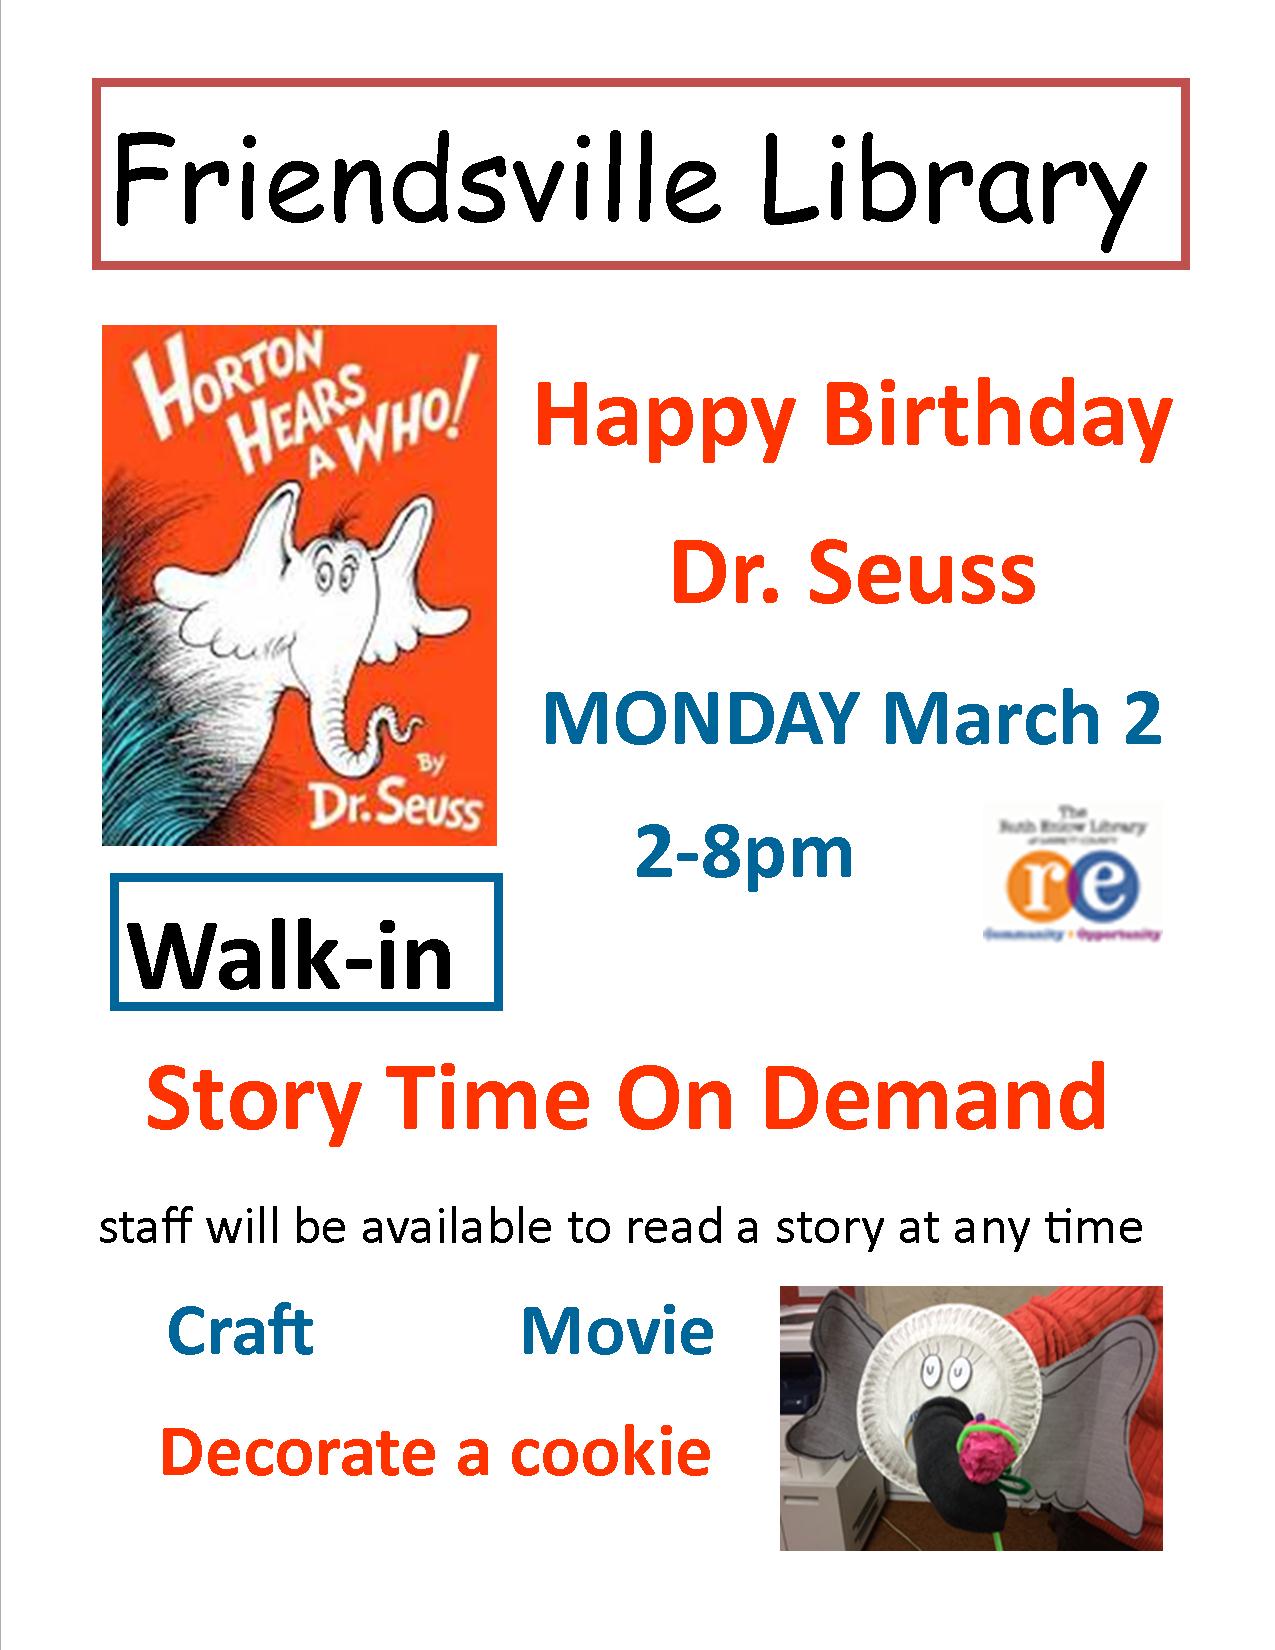 Horton hears a Who  Monday March 2 2-8 pm  story time with on demand stories, craft, movies